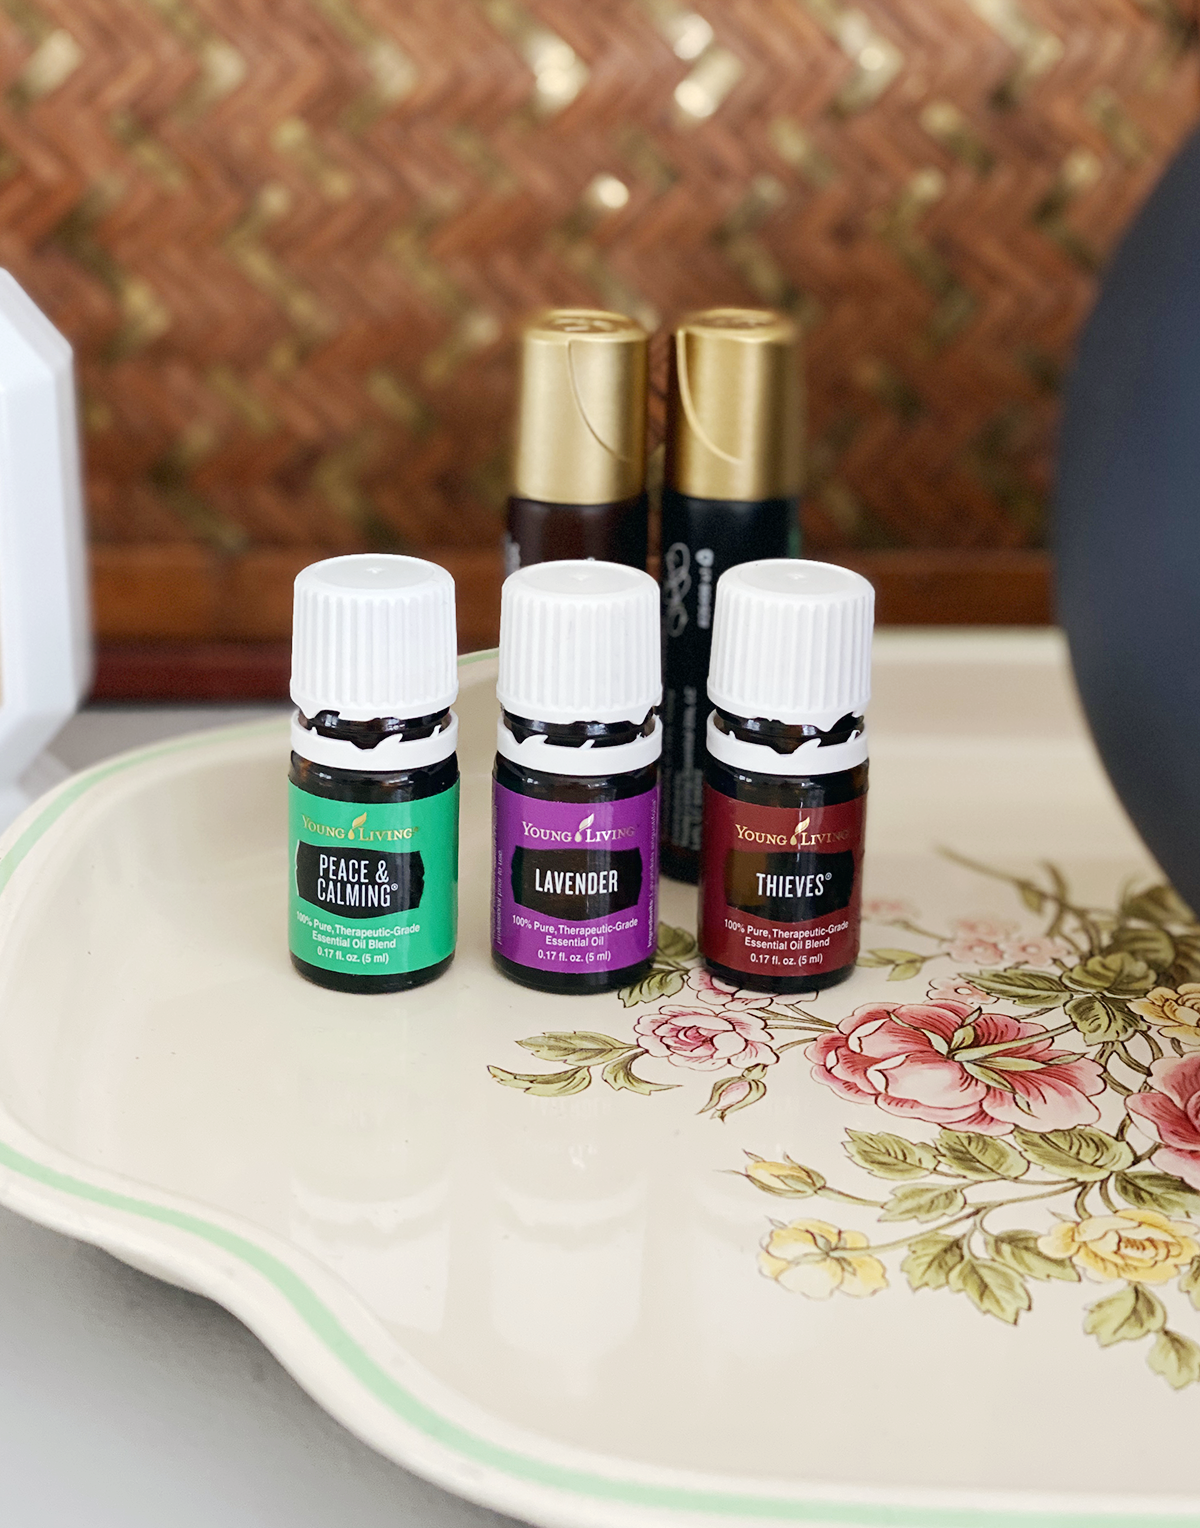 My three go to oils for diffusing in the bedroom